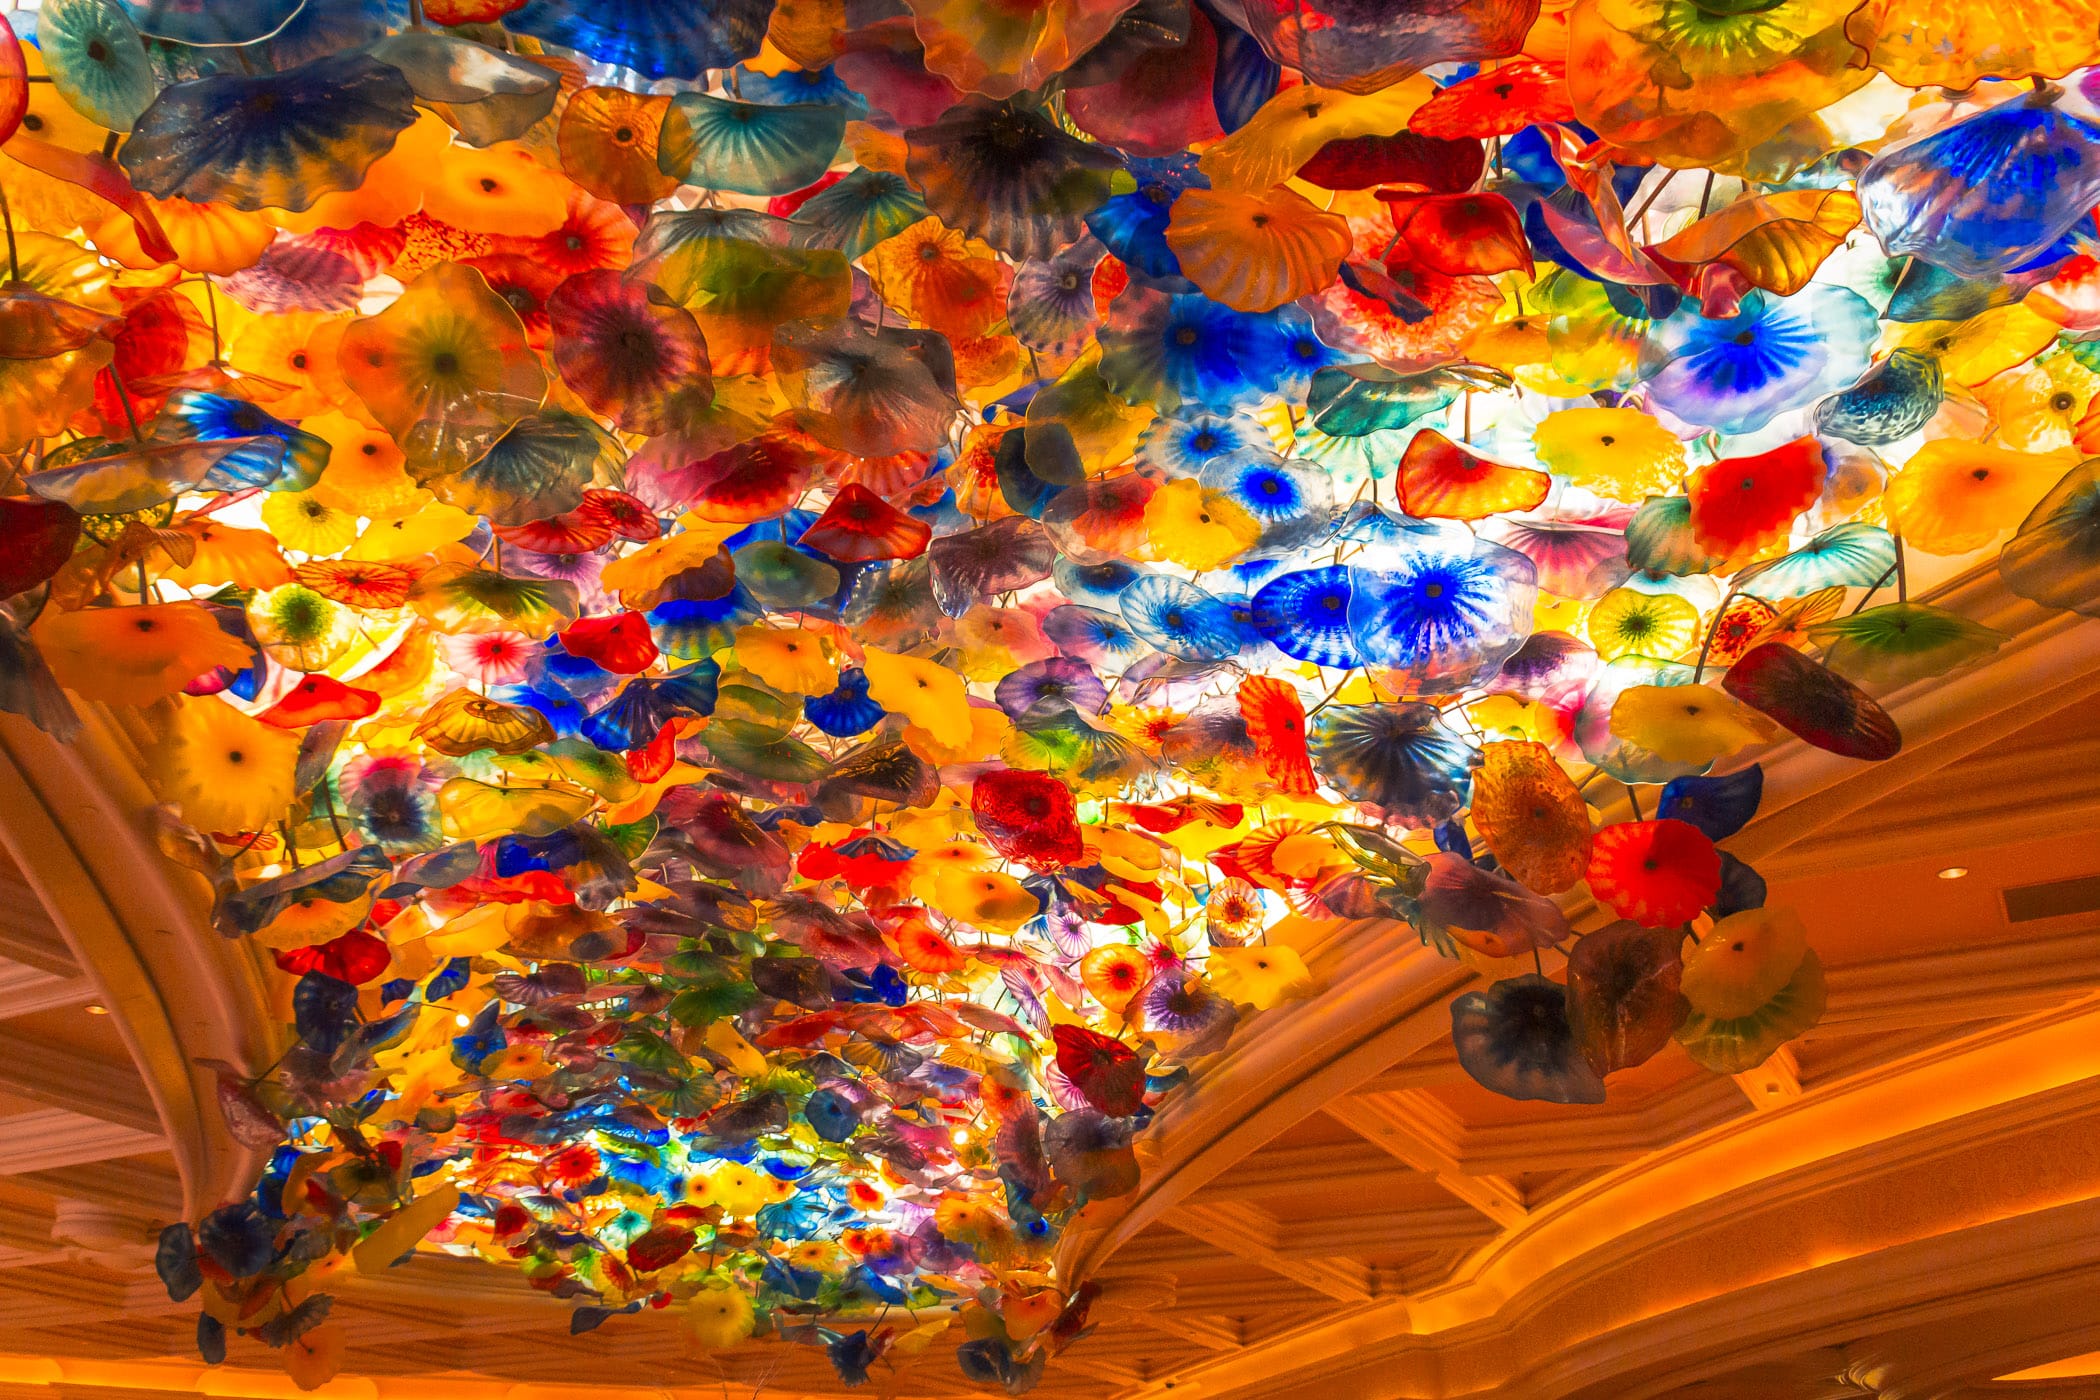 Glass artist Dale Chihuly’s Fiori di Como, composed of over 2,000 hand-blown glass flowers, covers 2,000 square feet of the lobby ceiling inside Las Vegas’ Bellagio Hotel and Casino.